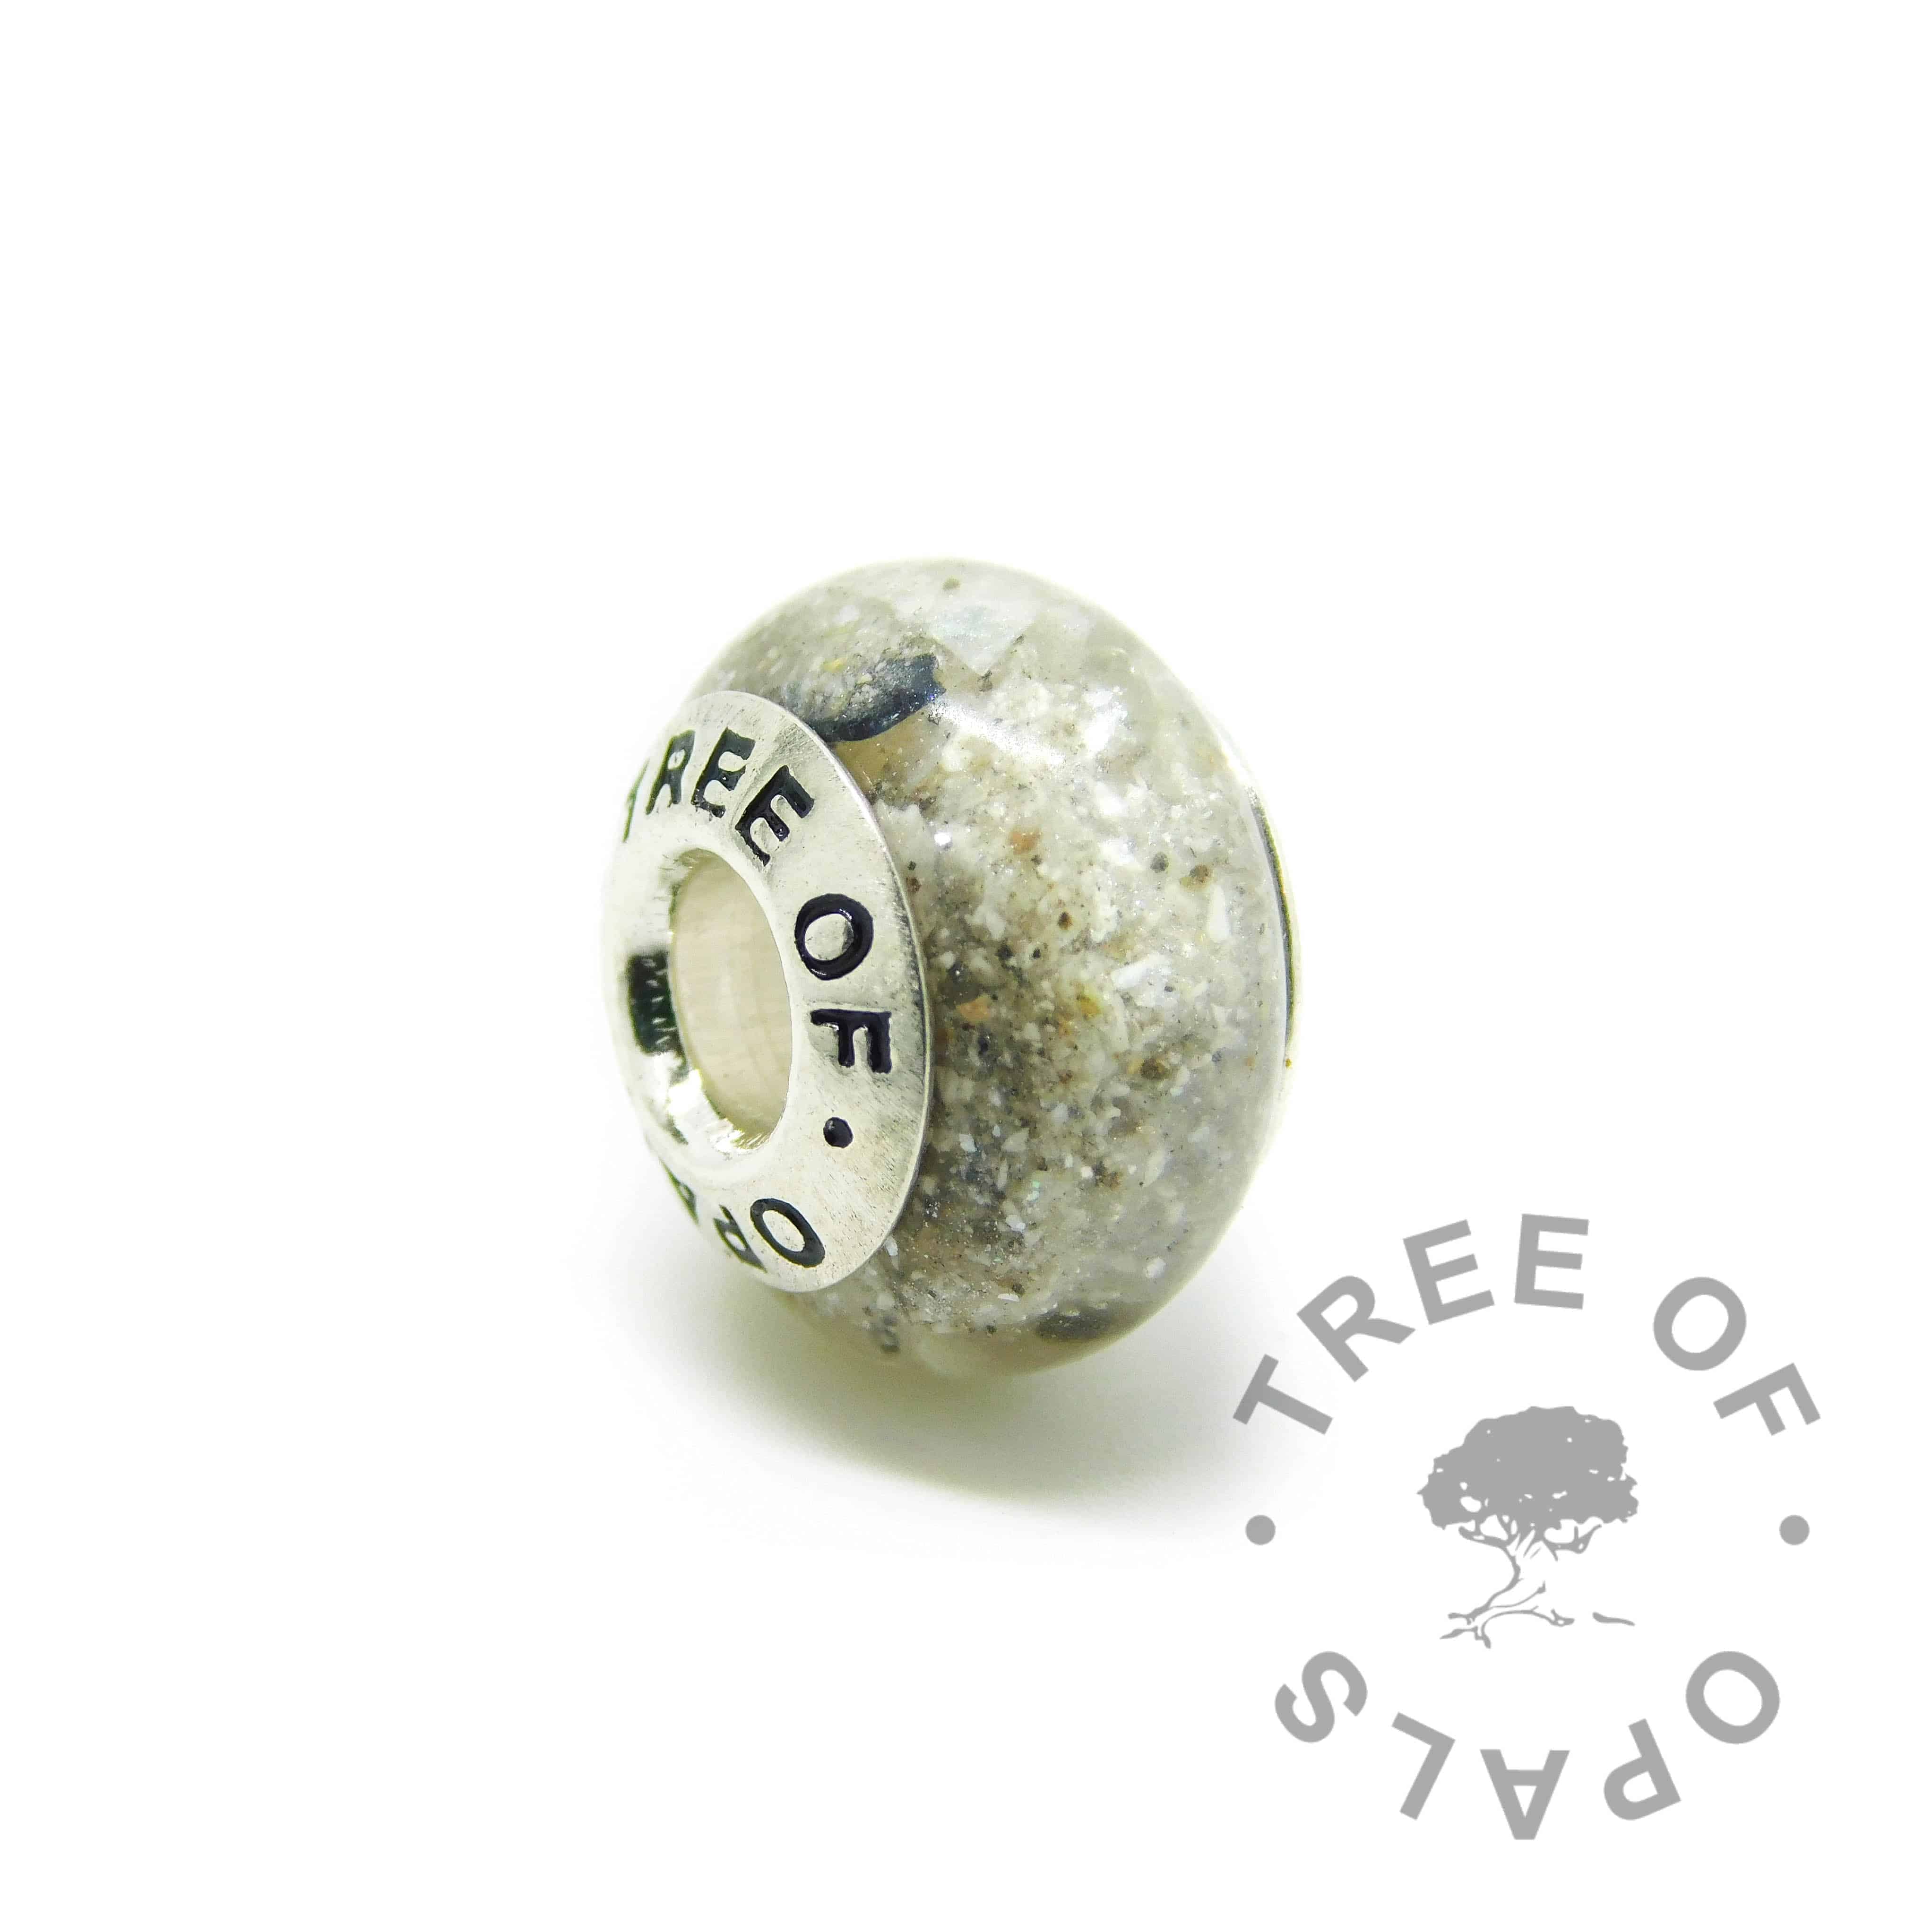 Cremation ash charm with unicorn white resin sparkle mix, naturally dark ashes, no birthstone. Solid sterling silver Tree of Opals signature core (925 stamped on the back). Watermarked copyright Tree of Opals memorial jewellery image